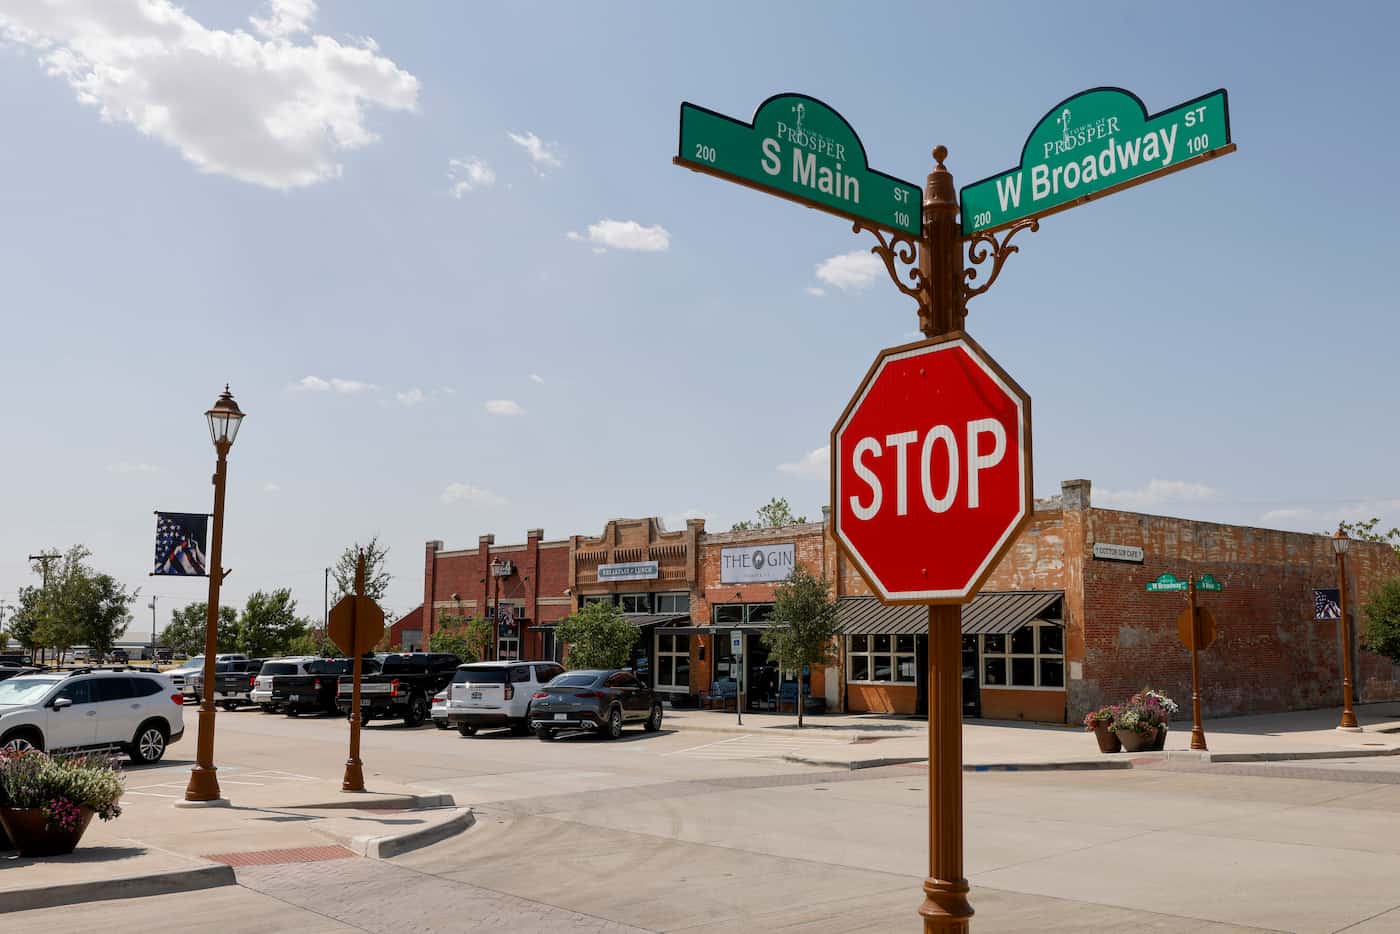 The intersection of South Main and West Broadway Streets in downtown Prosper.